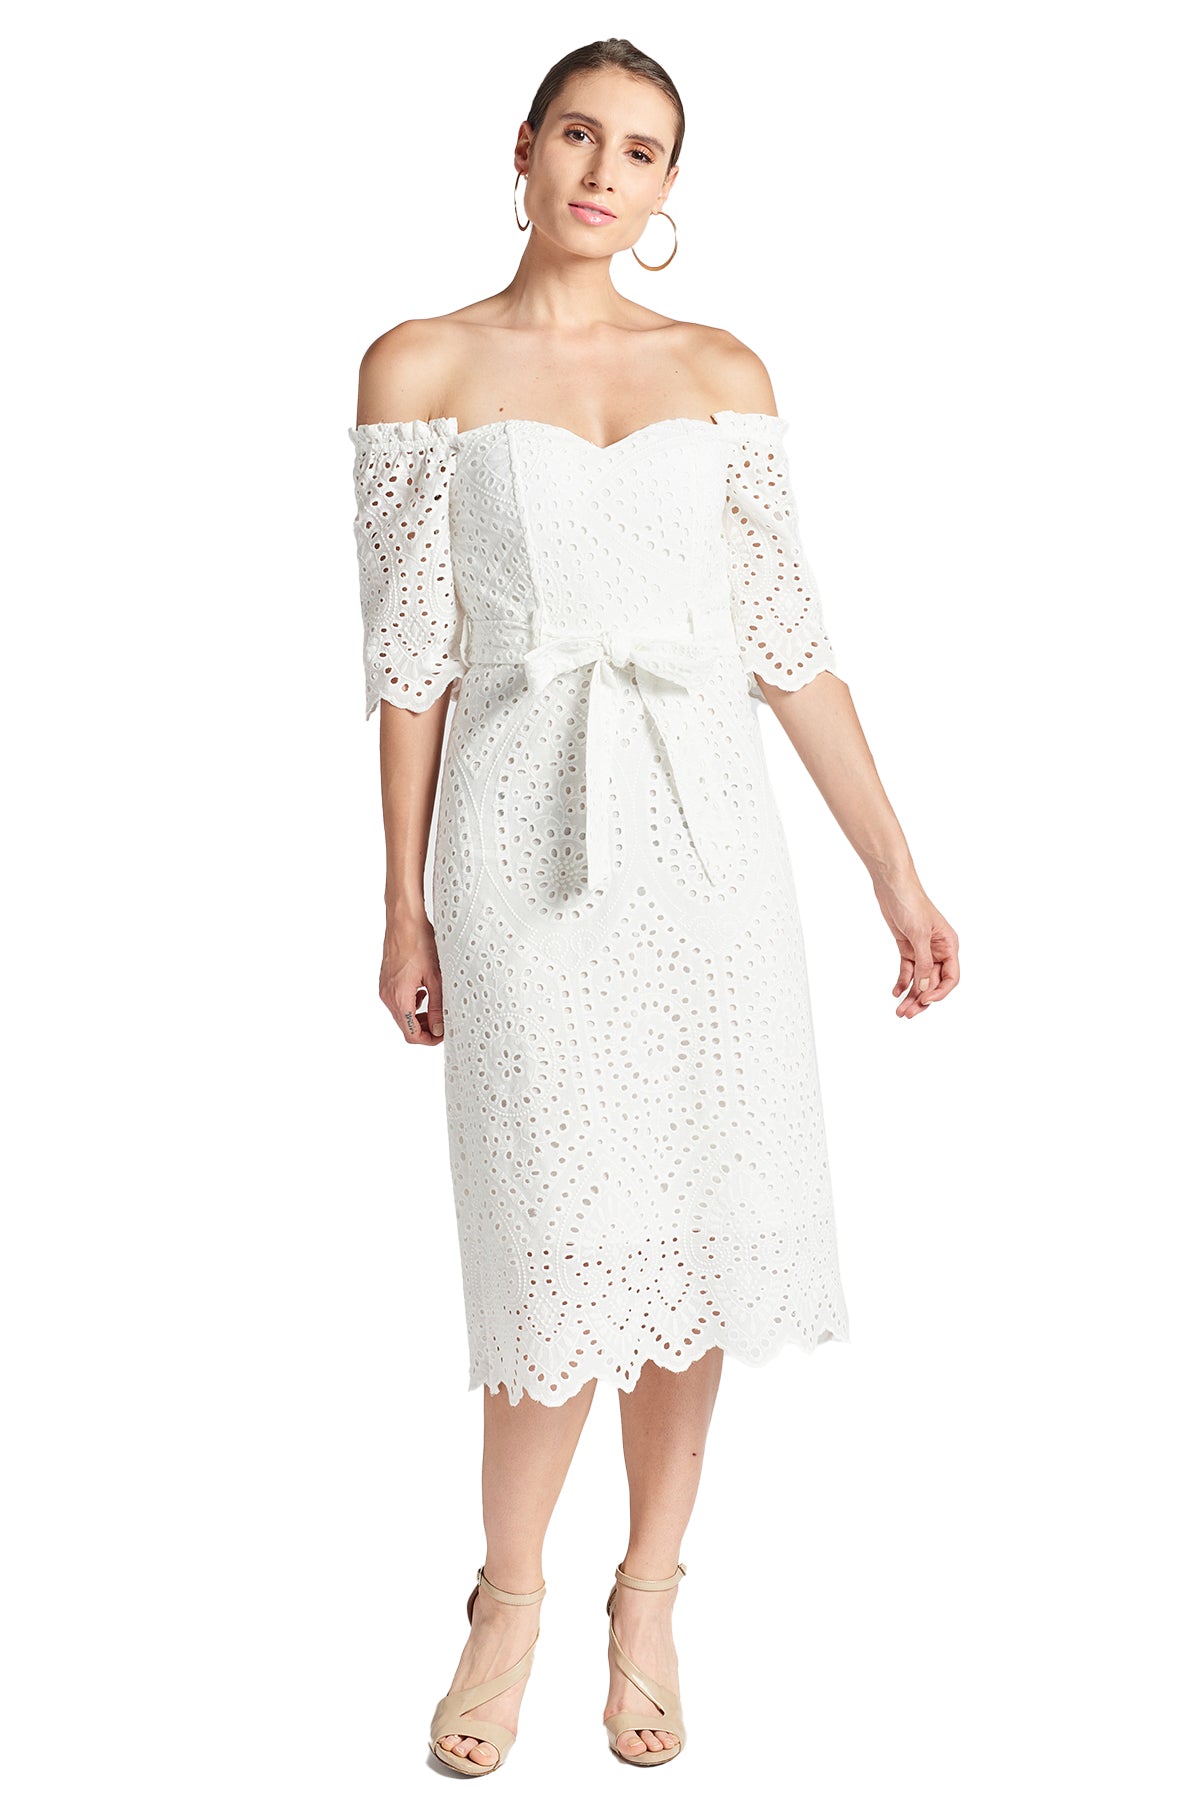 Front view of model wearing the Simona Maghen Jasmine Dress, white cotton scalloped eyelet midi a-line dress with off the shoulder sweetheart neckline, self belt, and short sleeves.